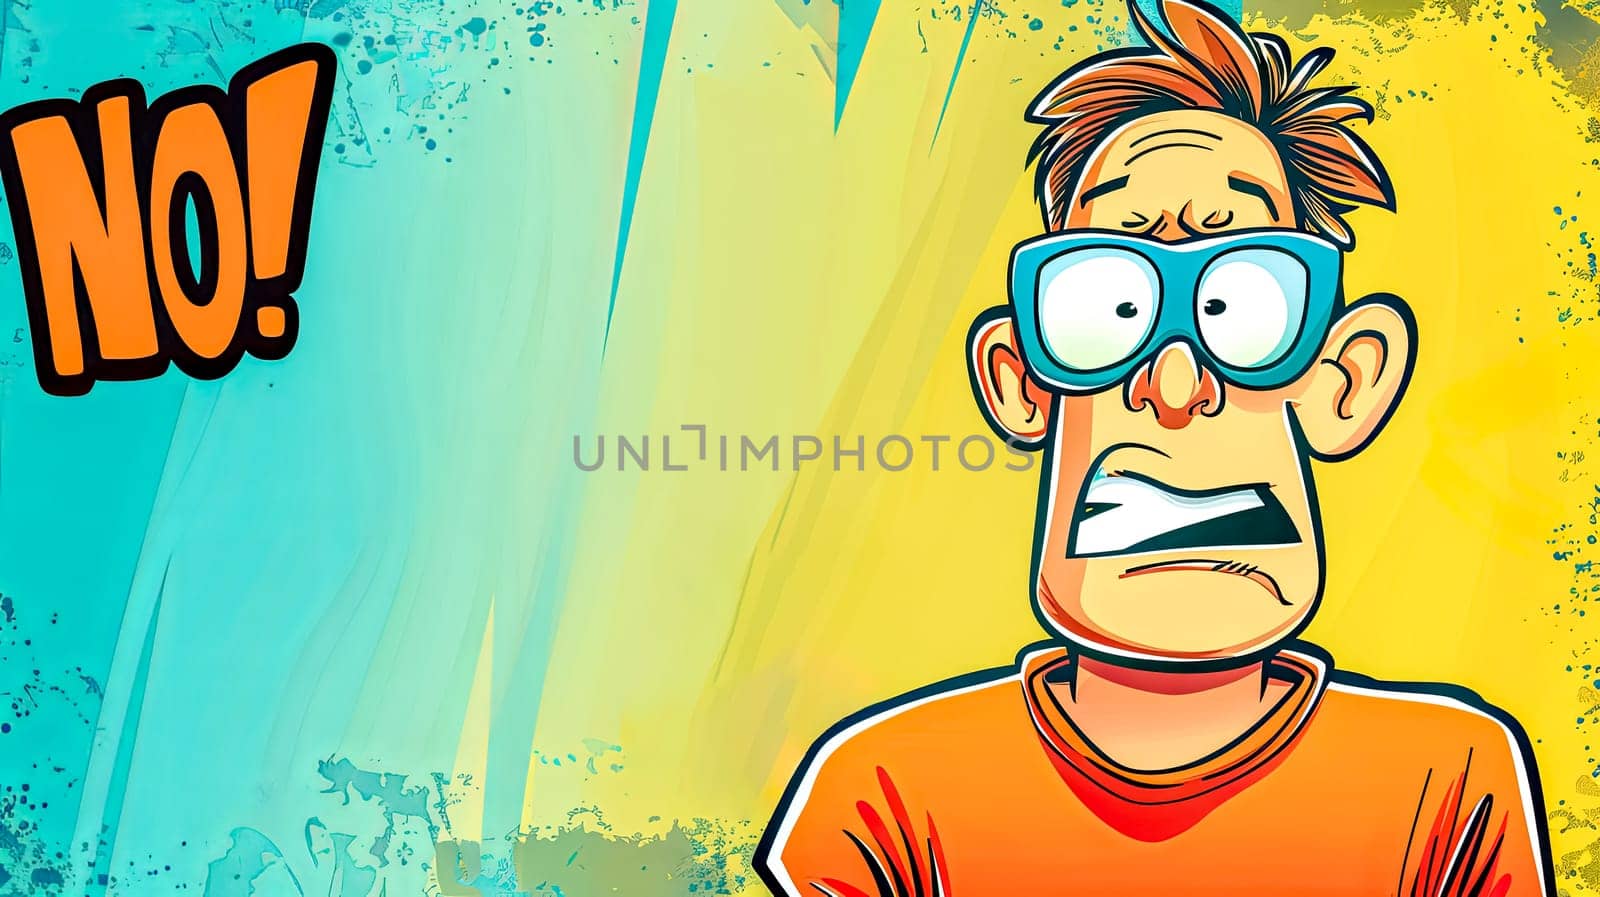 Cartoon character saying no with bold expression by Edophoto